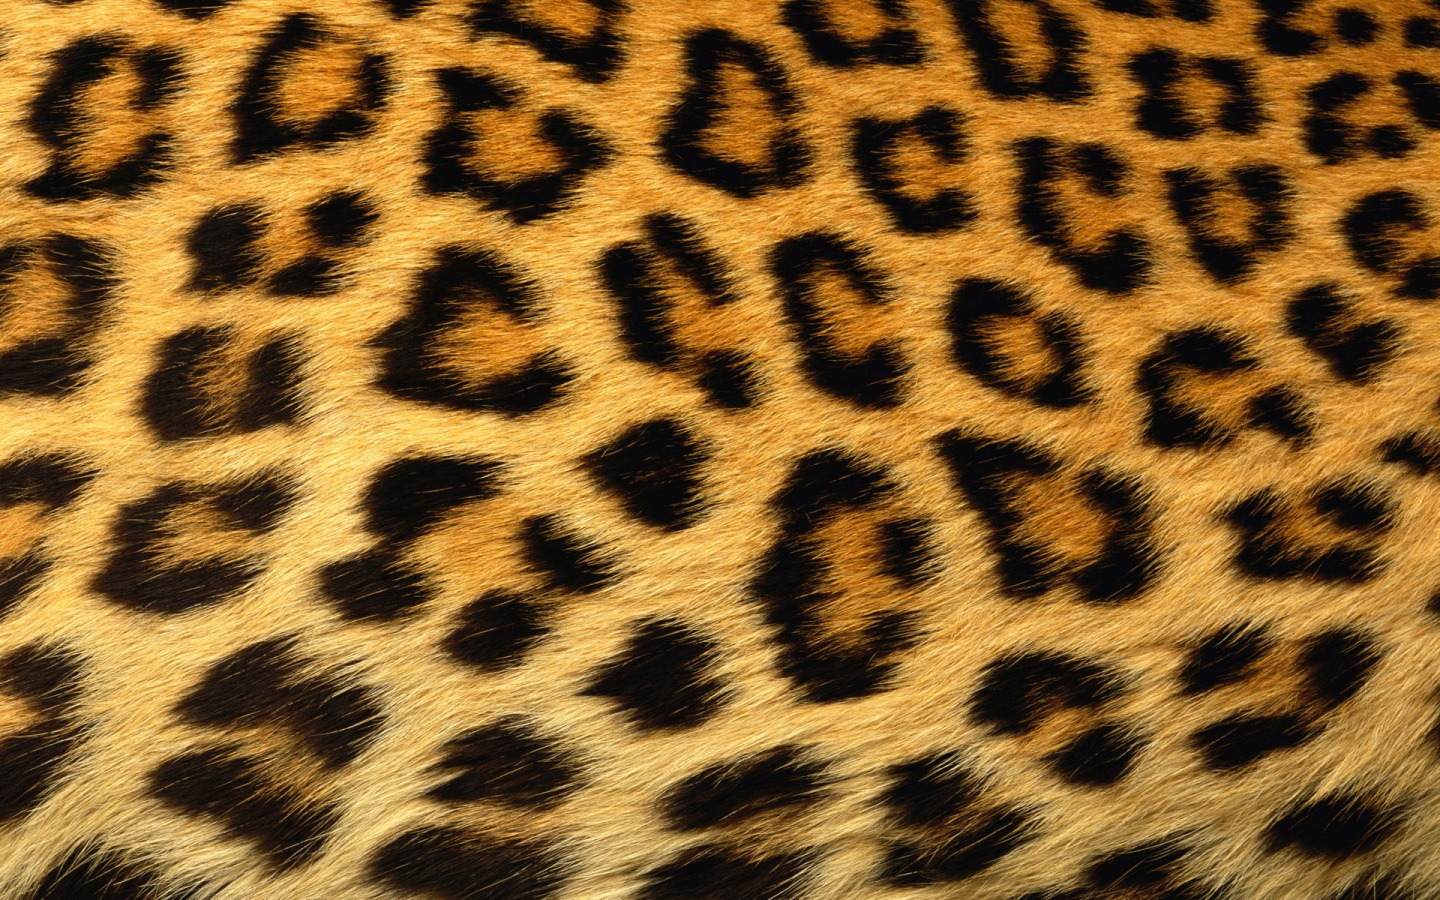 Leopard Print Background X Free Images at Clkercom